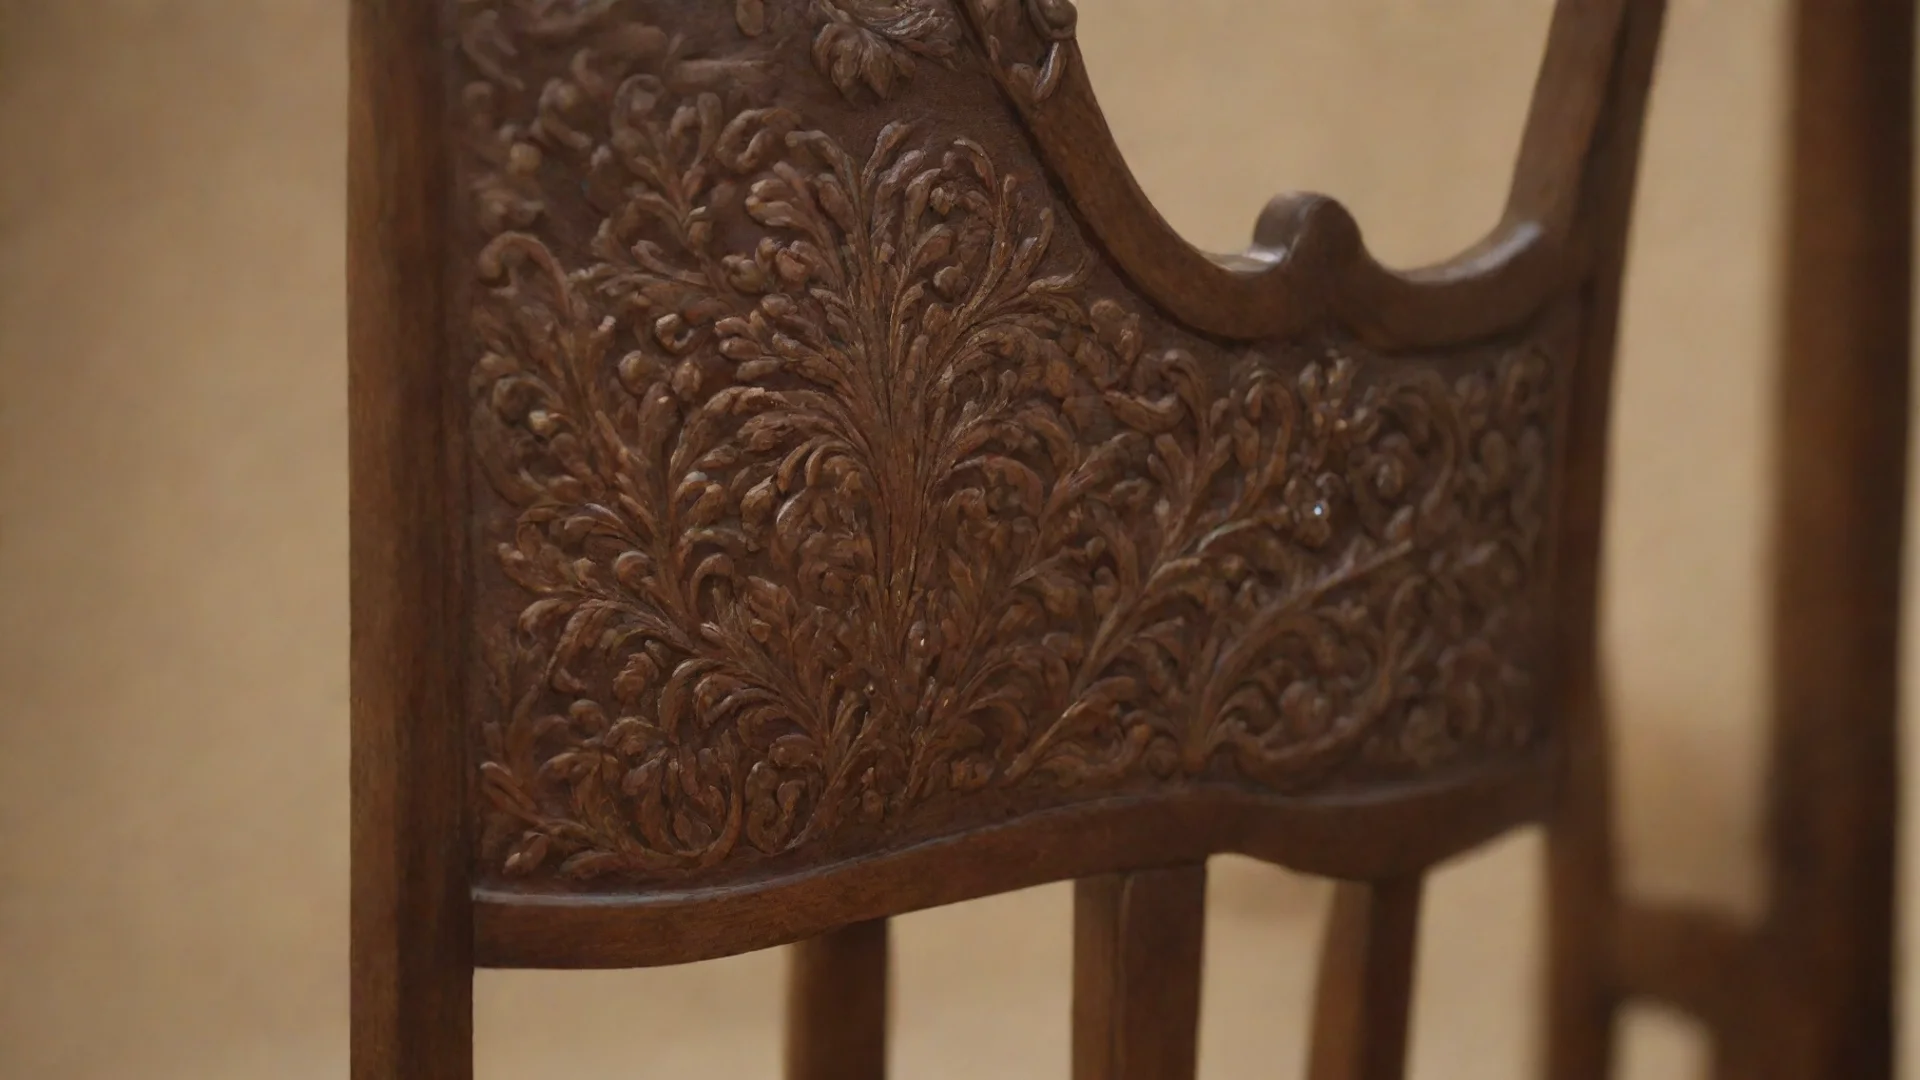 aiamazing detail view of a decorated chair back dark brown at the edge blurred with high craftsmanship awesome portrait 2 hdwidescreen